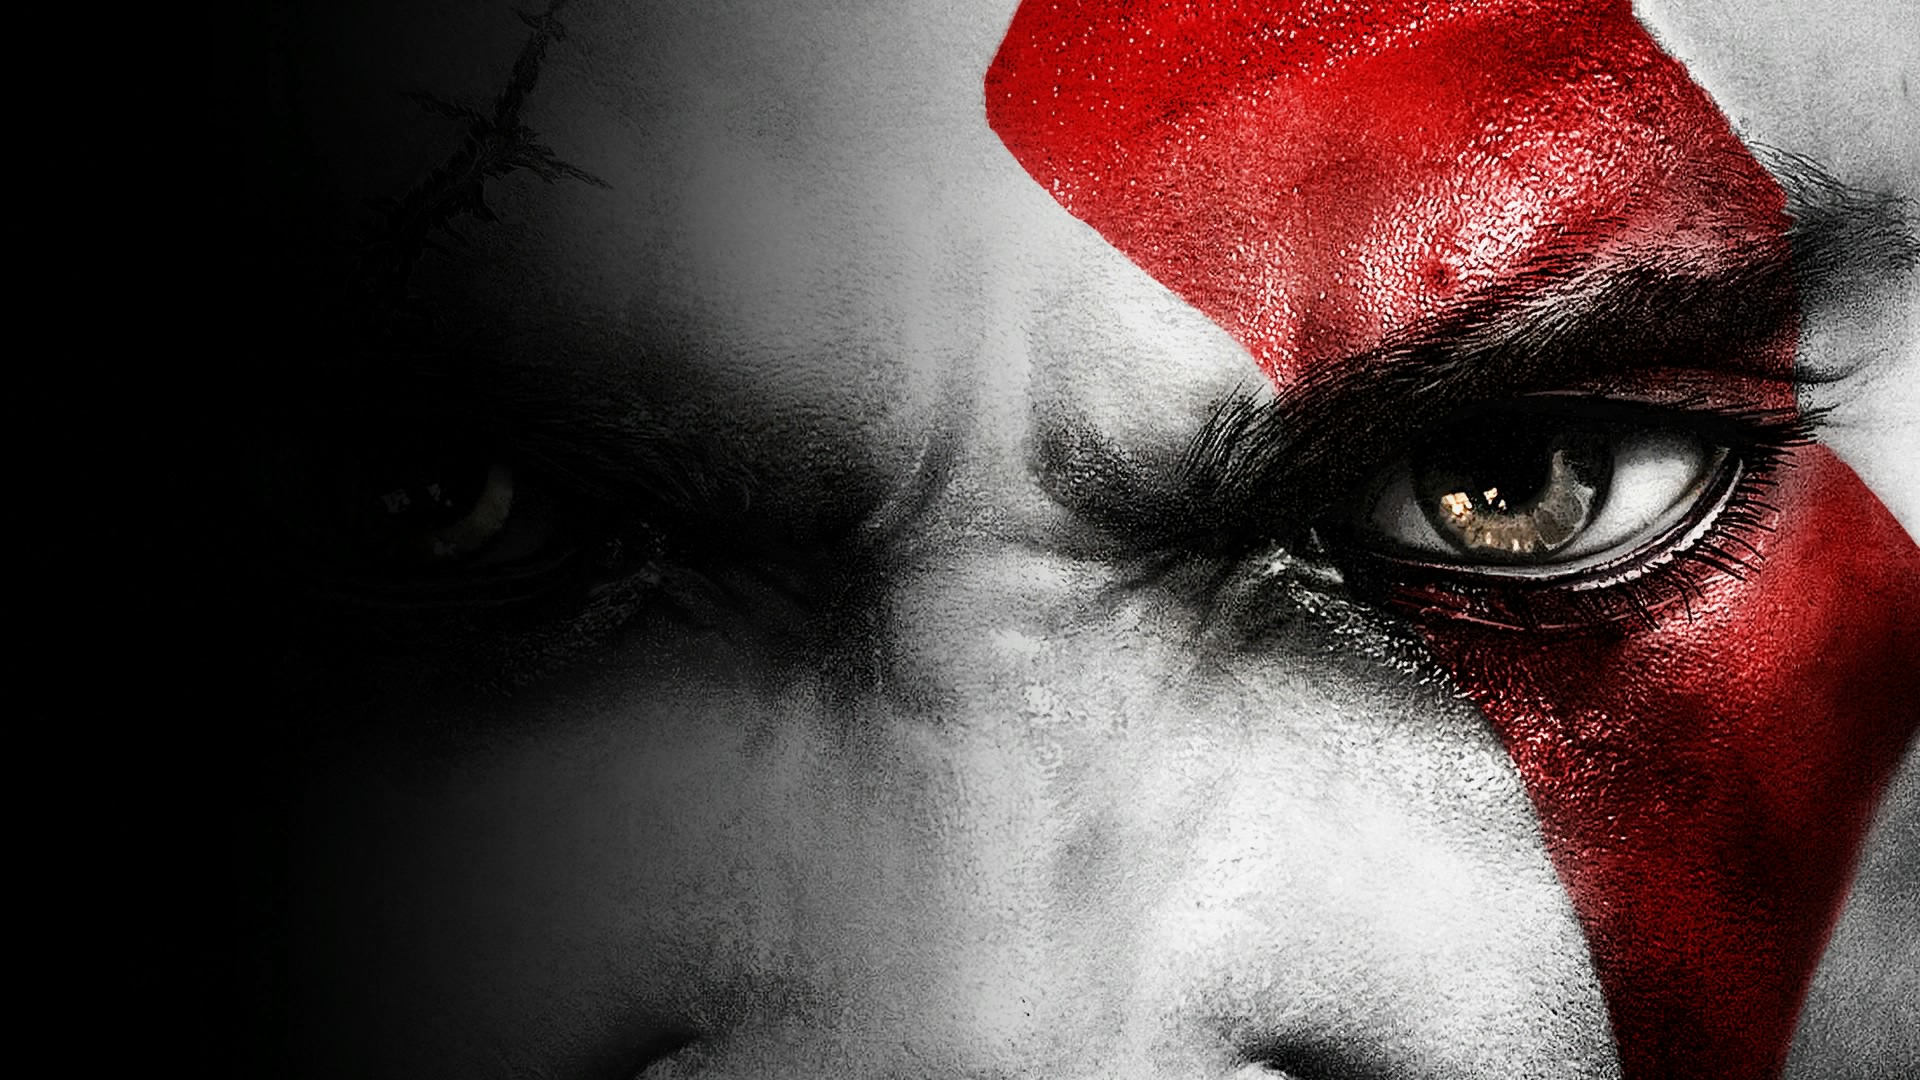 God of War 3 Wallpapers for PC Windows Wallpaper Download